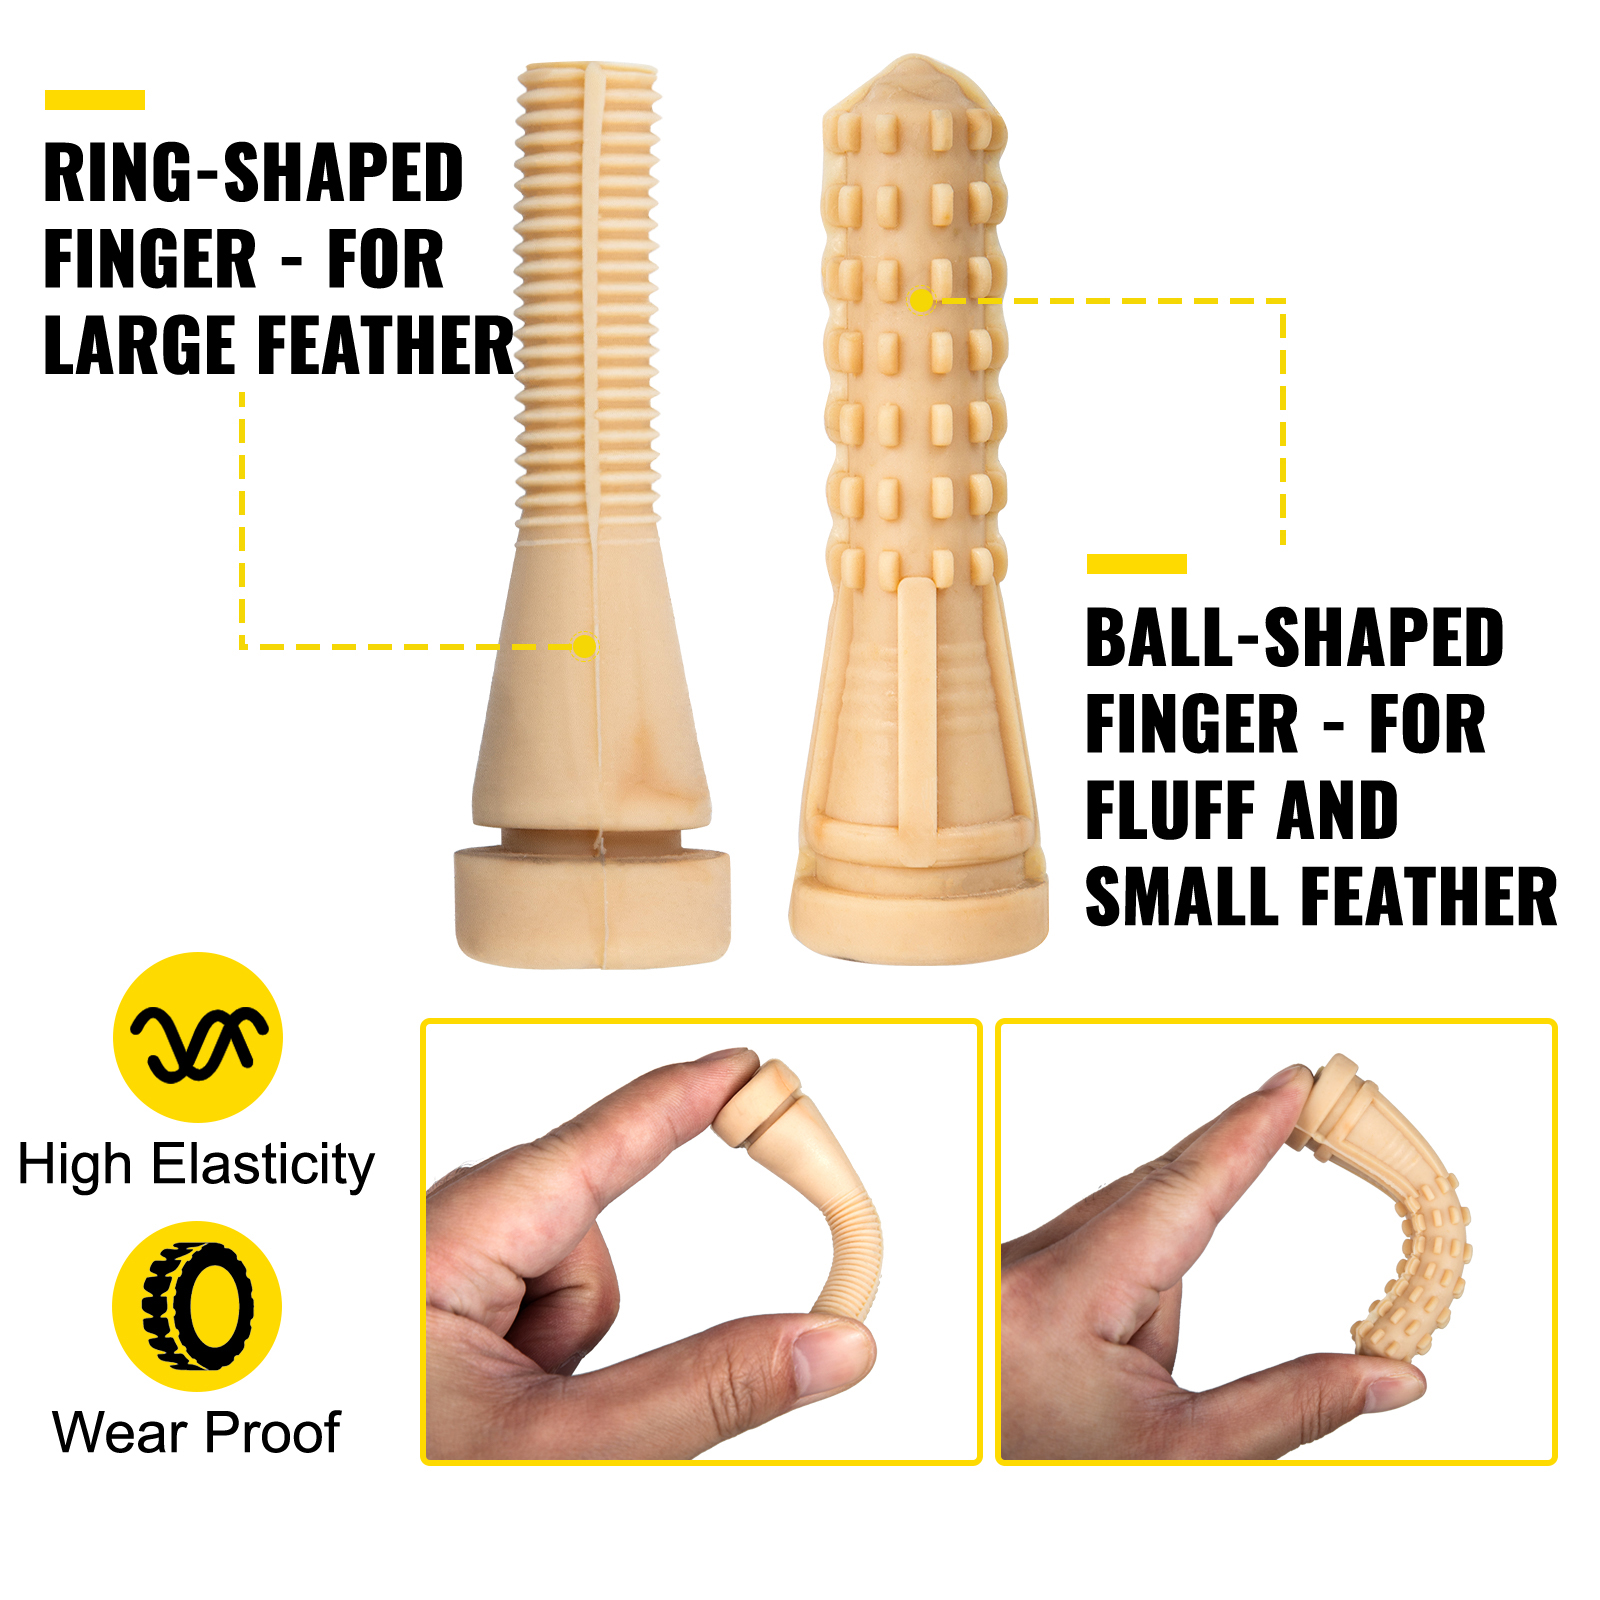 Poultry plucker! Make it easy Chicken plucker 24 fingers life-time guarantee 